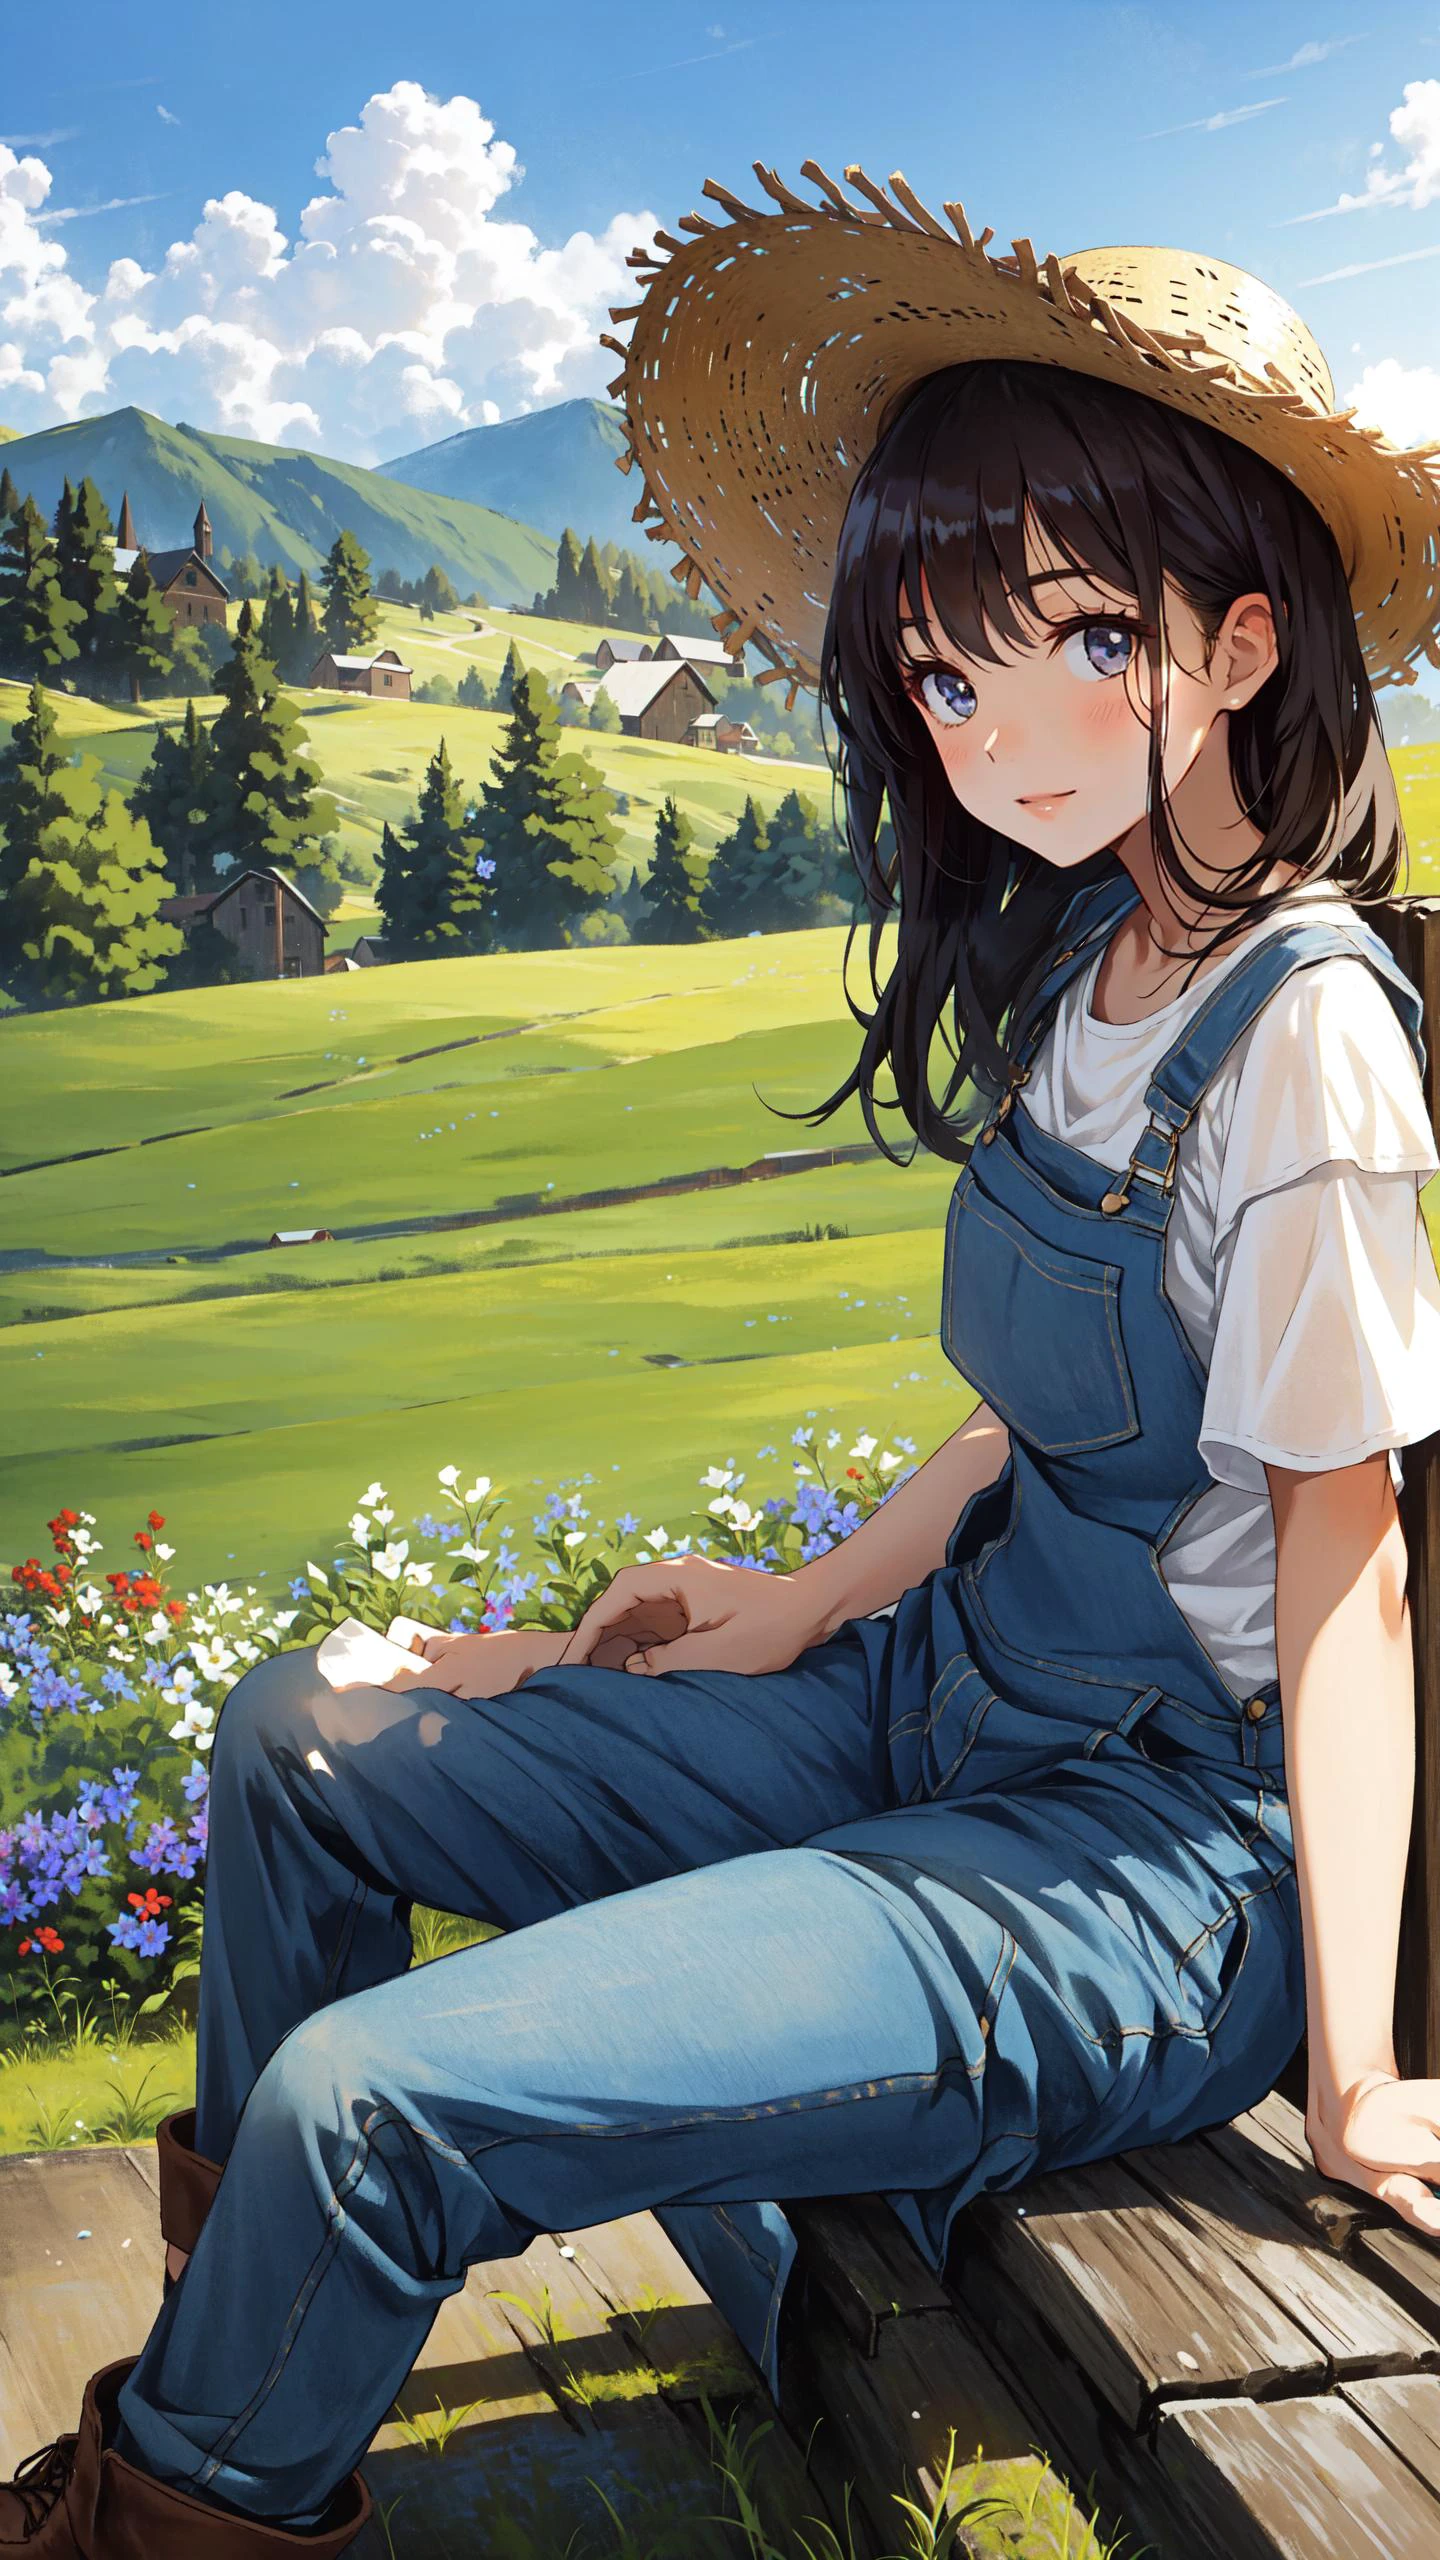 (Layered Depth, Parallax Effect, Soft focus foreground:1.3) (quaint countryside setting, summer day), young adult woman, rustic casual summer fashion, (sitting on a wooden fence), thoughtful and serene pose, shoulder-length curly hair, light, sun-kissed makeup, (denim overalls over a simple white tshirt), comfortable boots, (holding a straw hat), (background: rolling hills, a distant barn, wildflowers), soft sunlight, (sense of relaxation and connection with the rural landscape)